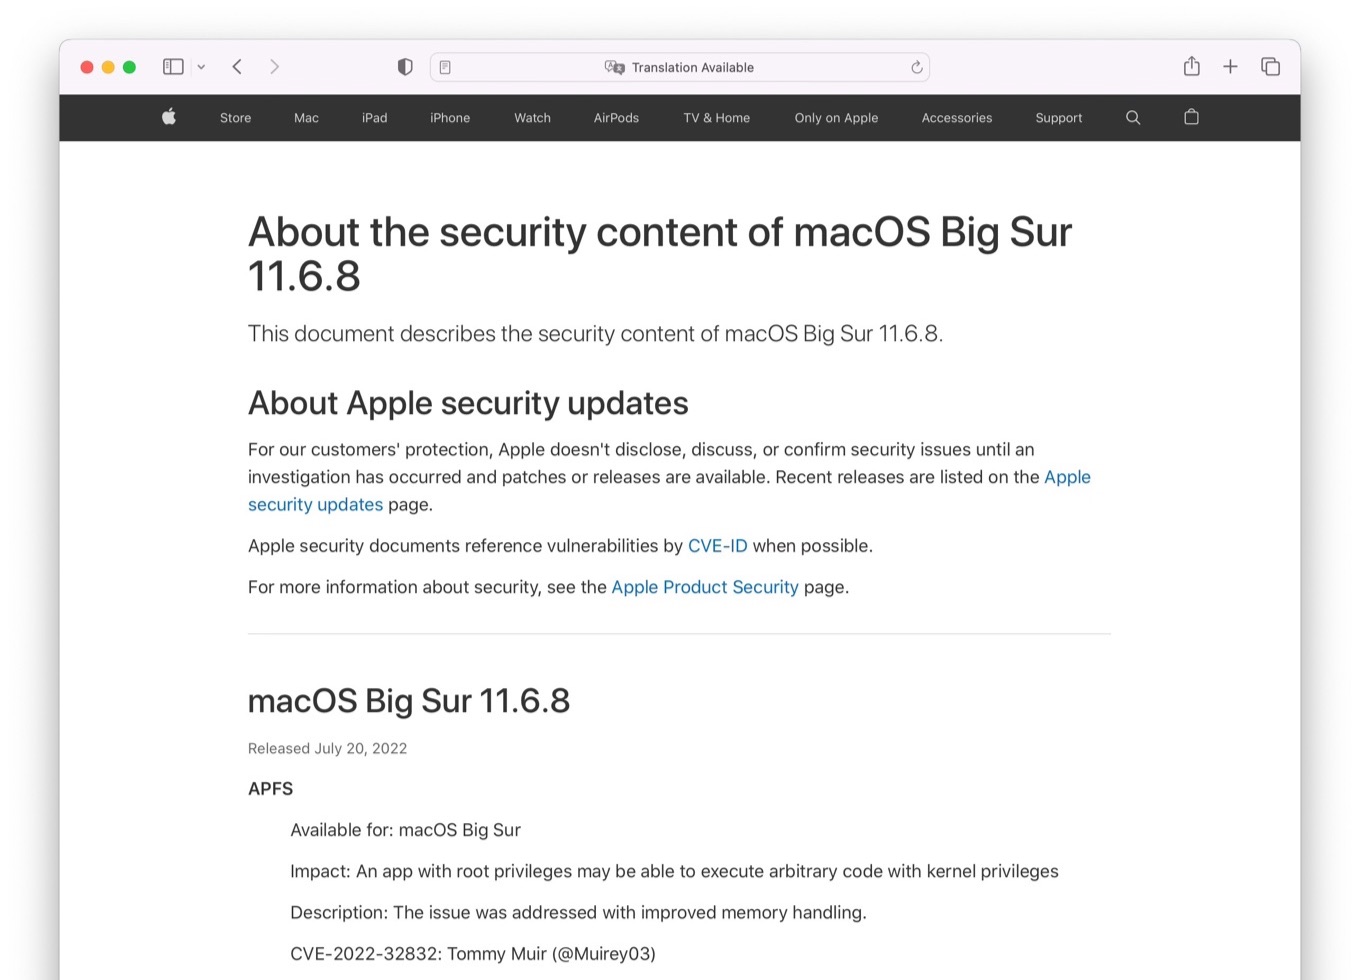 About the security content of macOS Big Sur 11.6.8